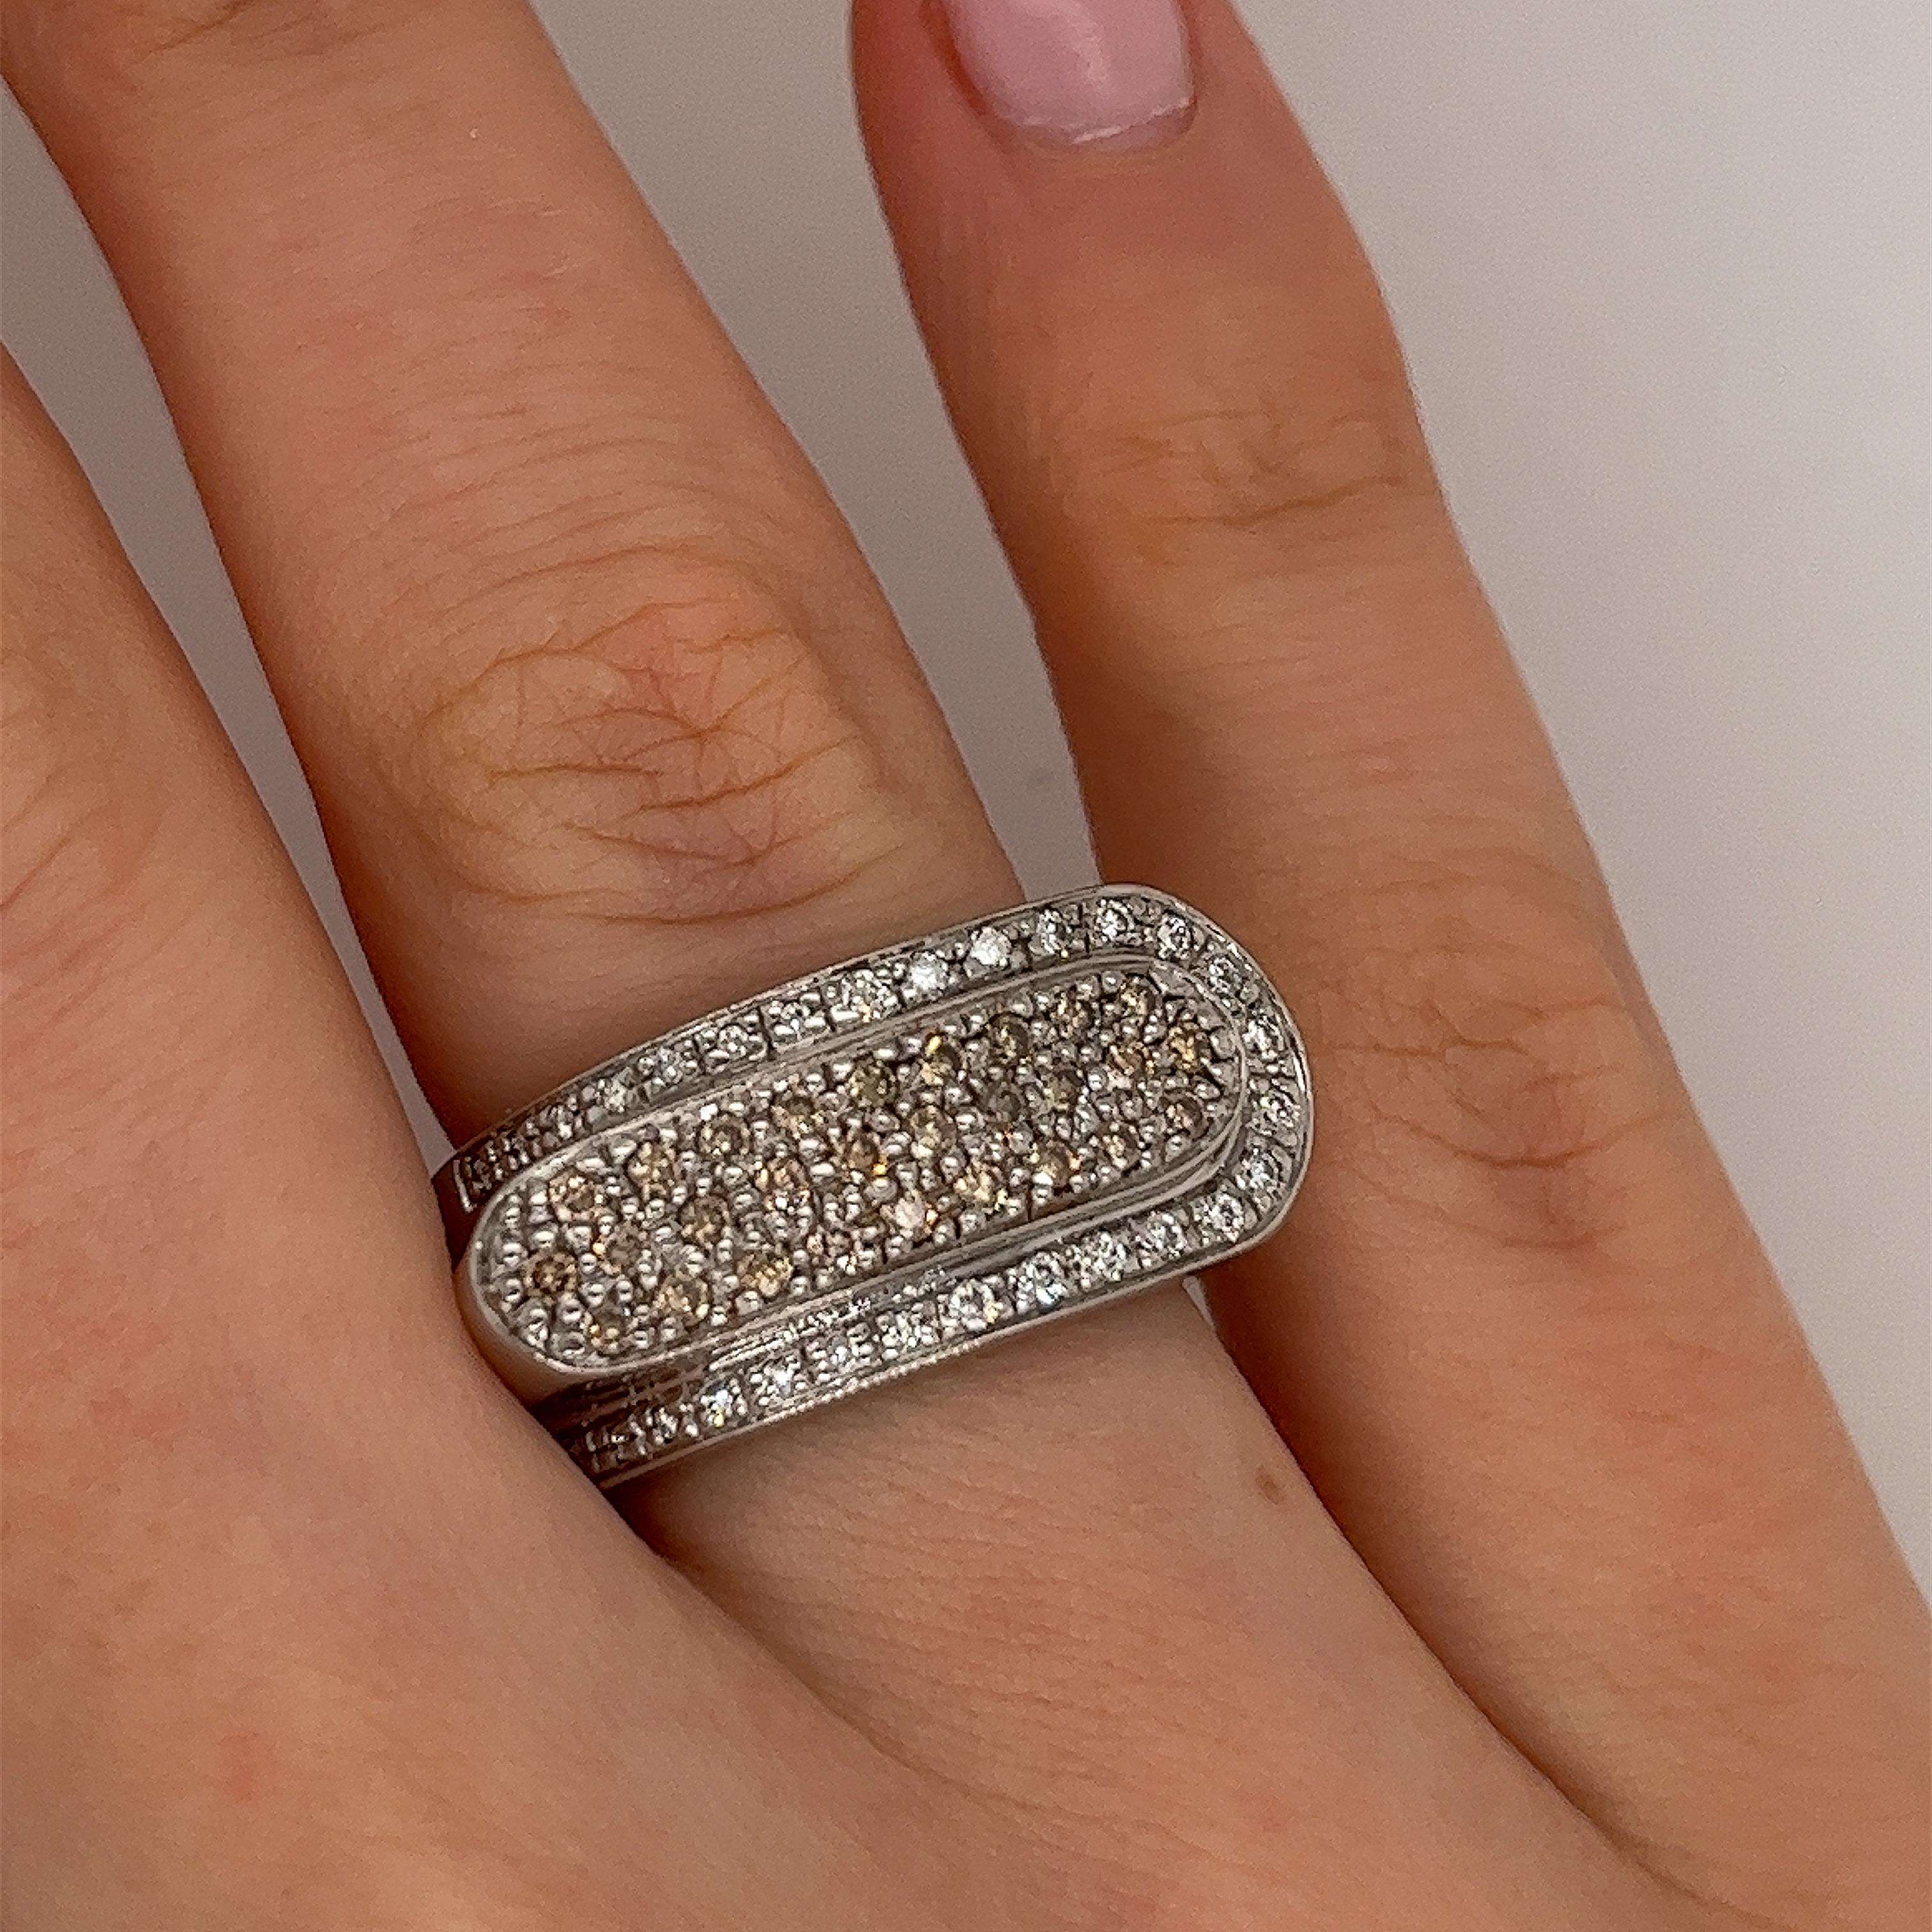 An elegant diamond pre-loved dress ring, set with 0.60ct round brilliant cut natural diamonds, a mix of white and brown diamonds, in a 14ct white gold setting.

Total Diamond Weight: 0.60ct
Diamond Colour: G / brown
Diamond Clarity: VS1
Width of